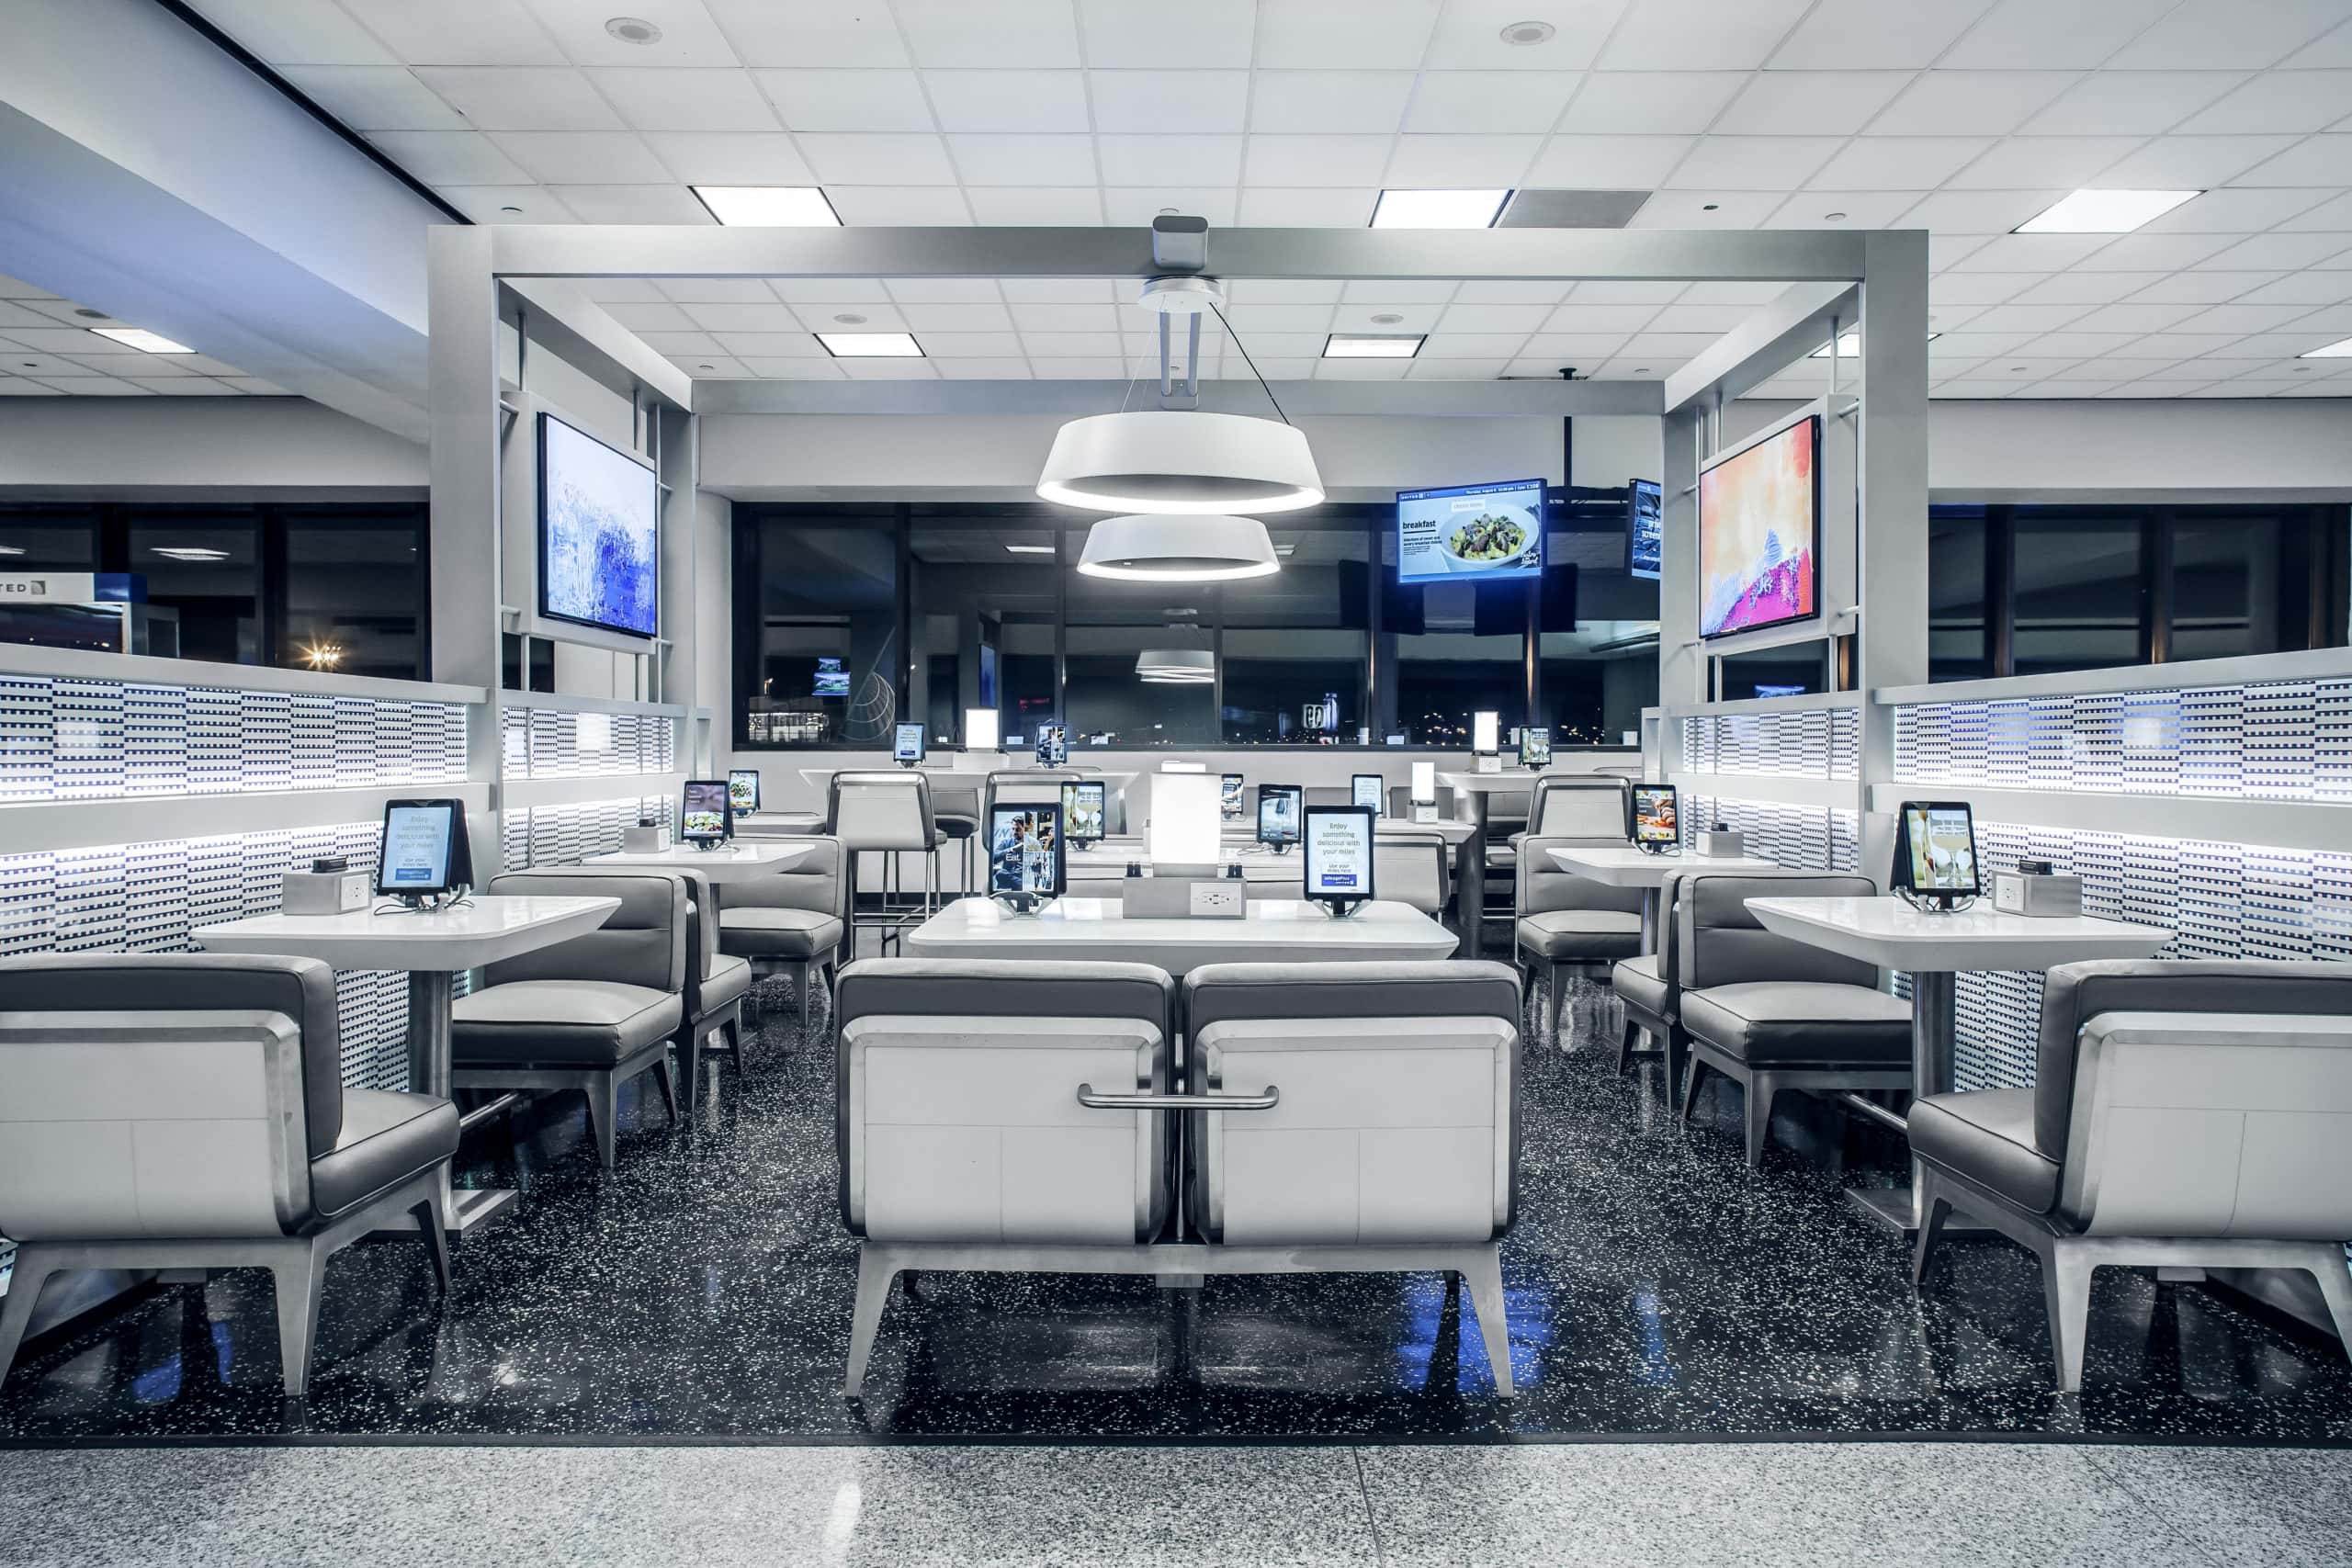 iPads are fixed to tables and counters in Gate Lounges at Newark and Houston airport. Image: OTG